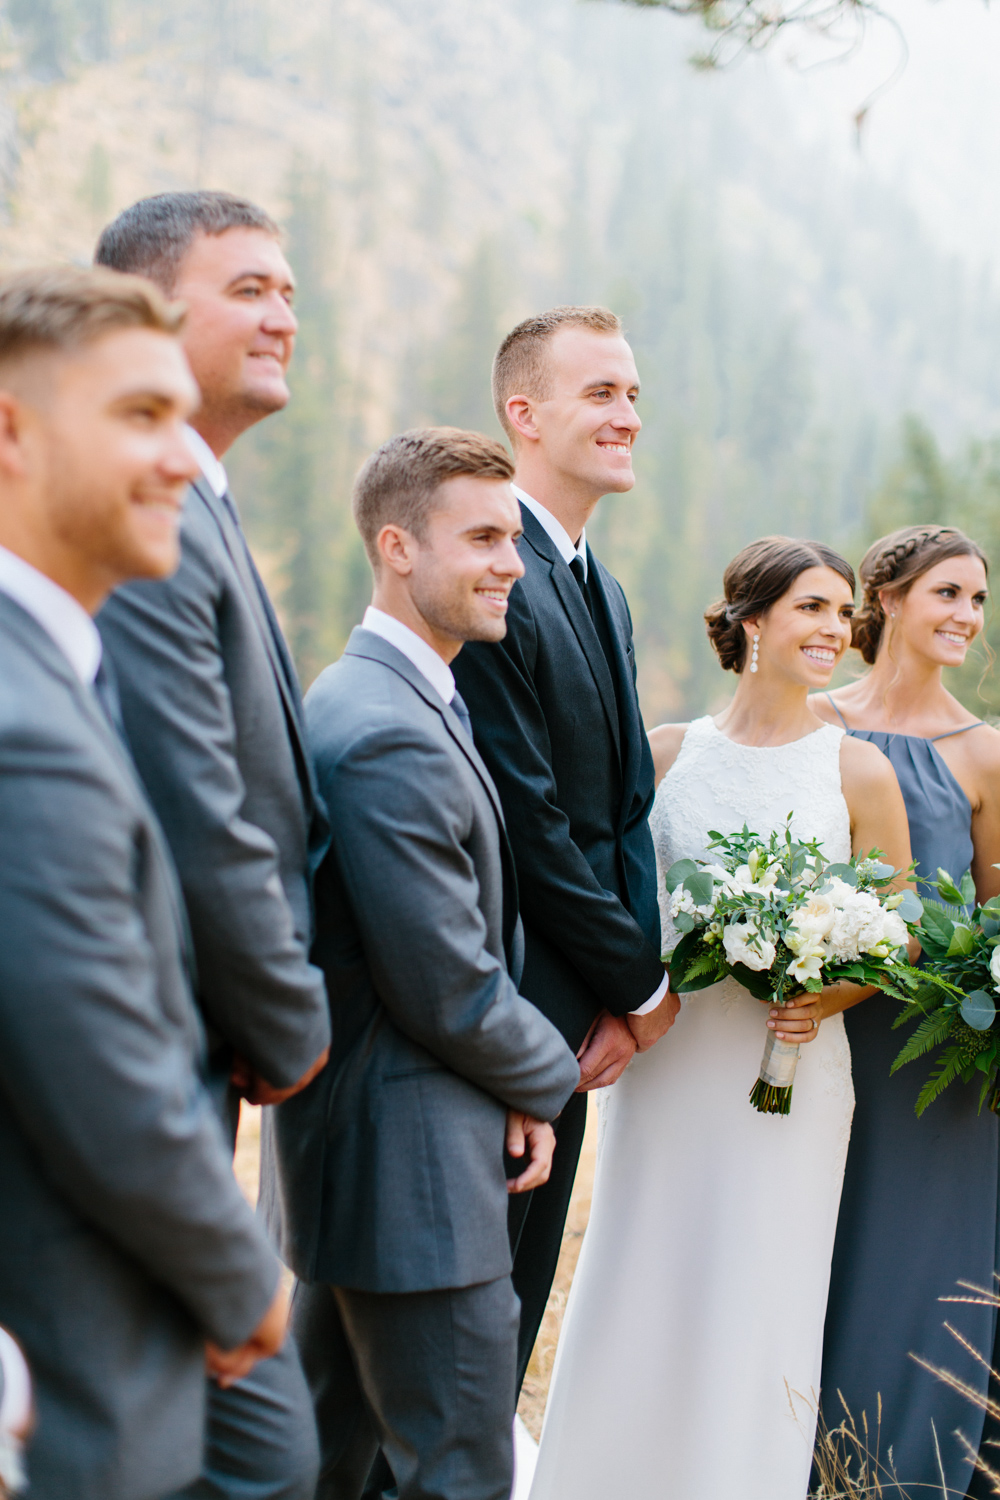 Grey and White Wedding in the Mountains of Leavenworth, Washington | Sleeping Lady | Classic and Timeless Wedding | VSCO | Bridal Party Portraits.jpg-0609.jpg